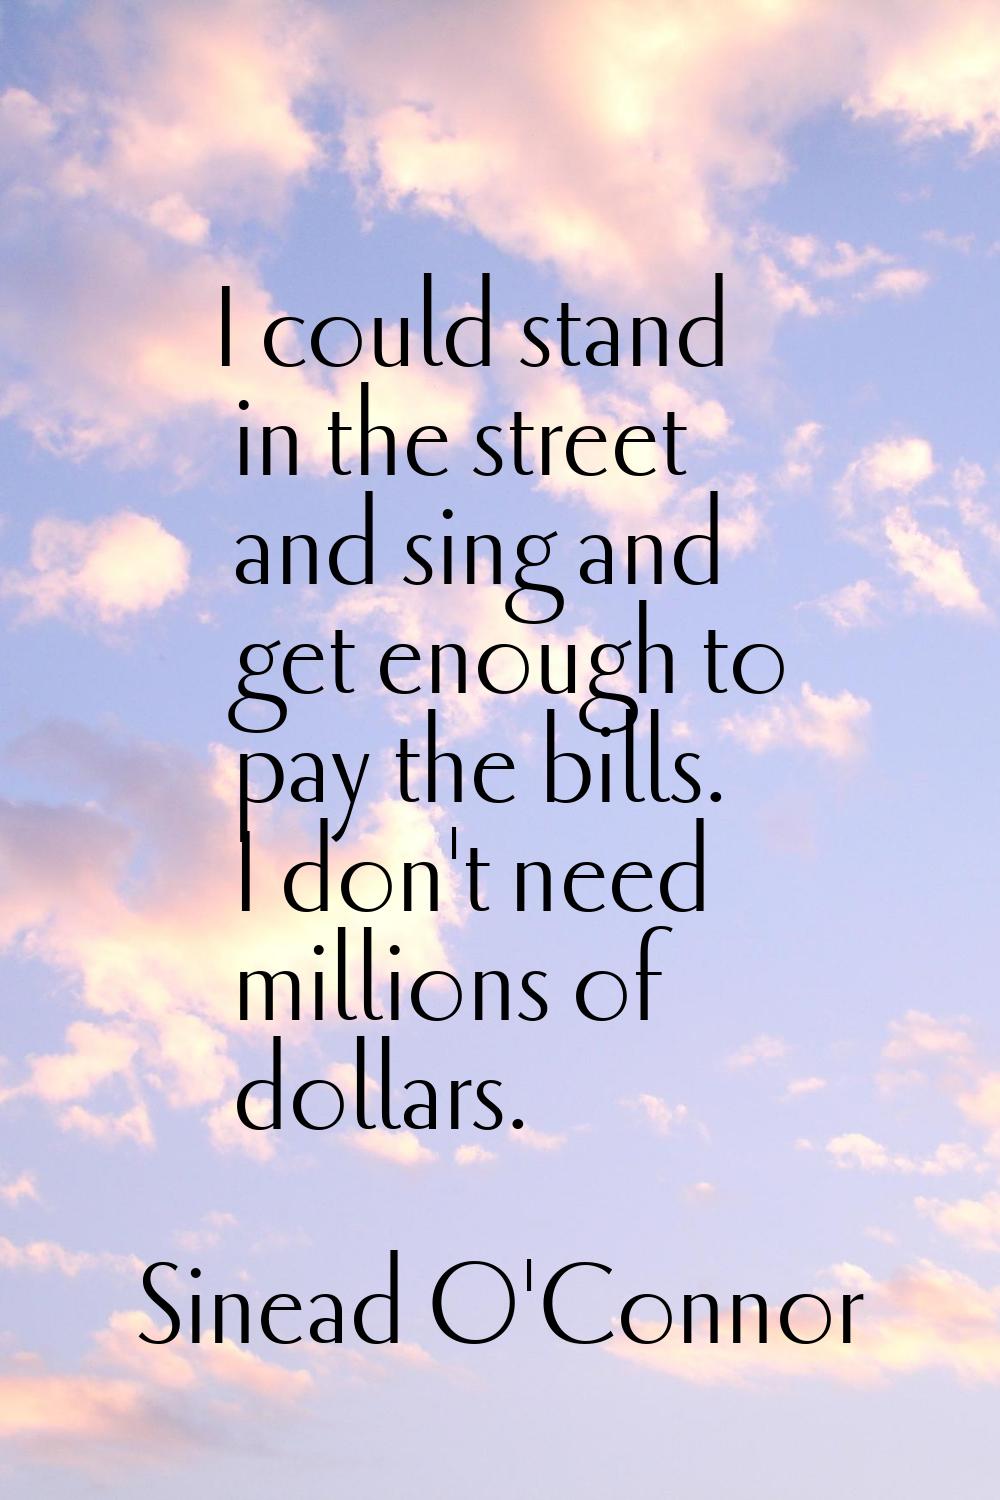 I could stand in the street and sing and get enough to pay the bills. I don't need millions of doll